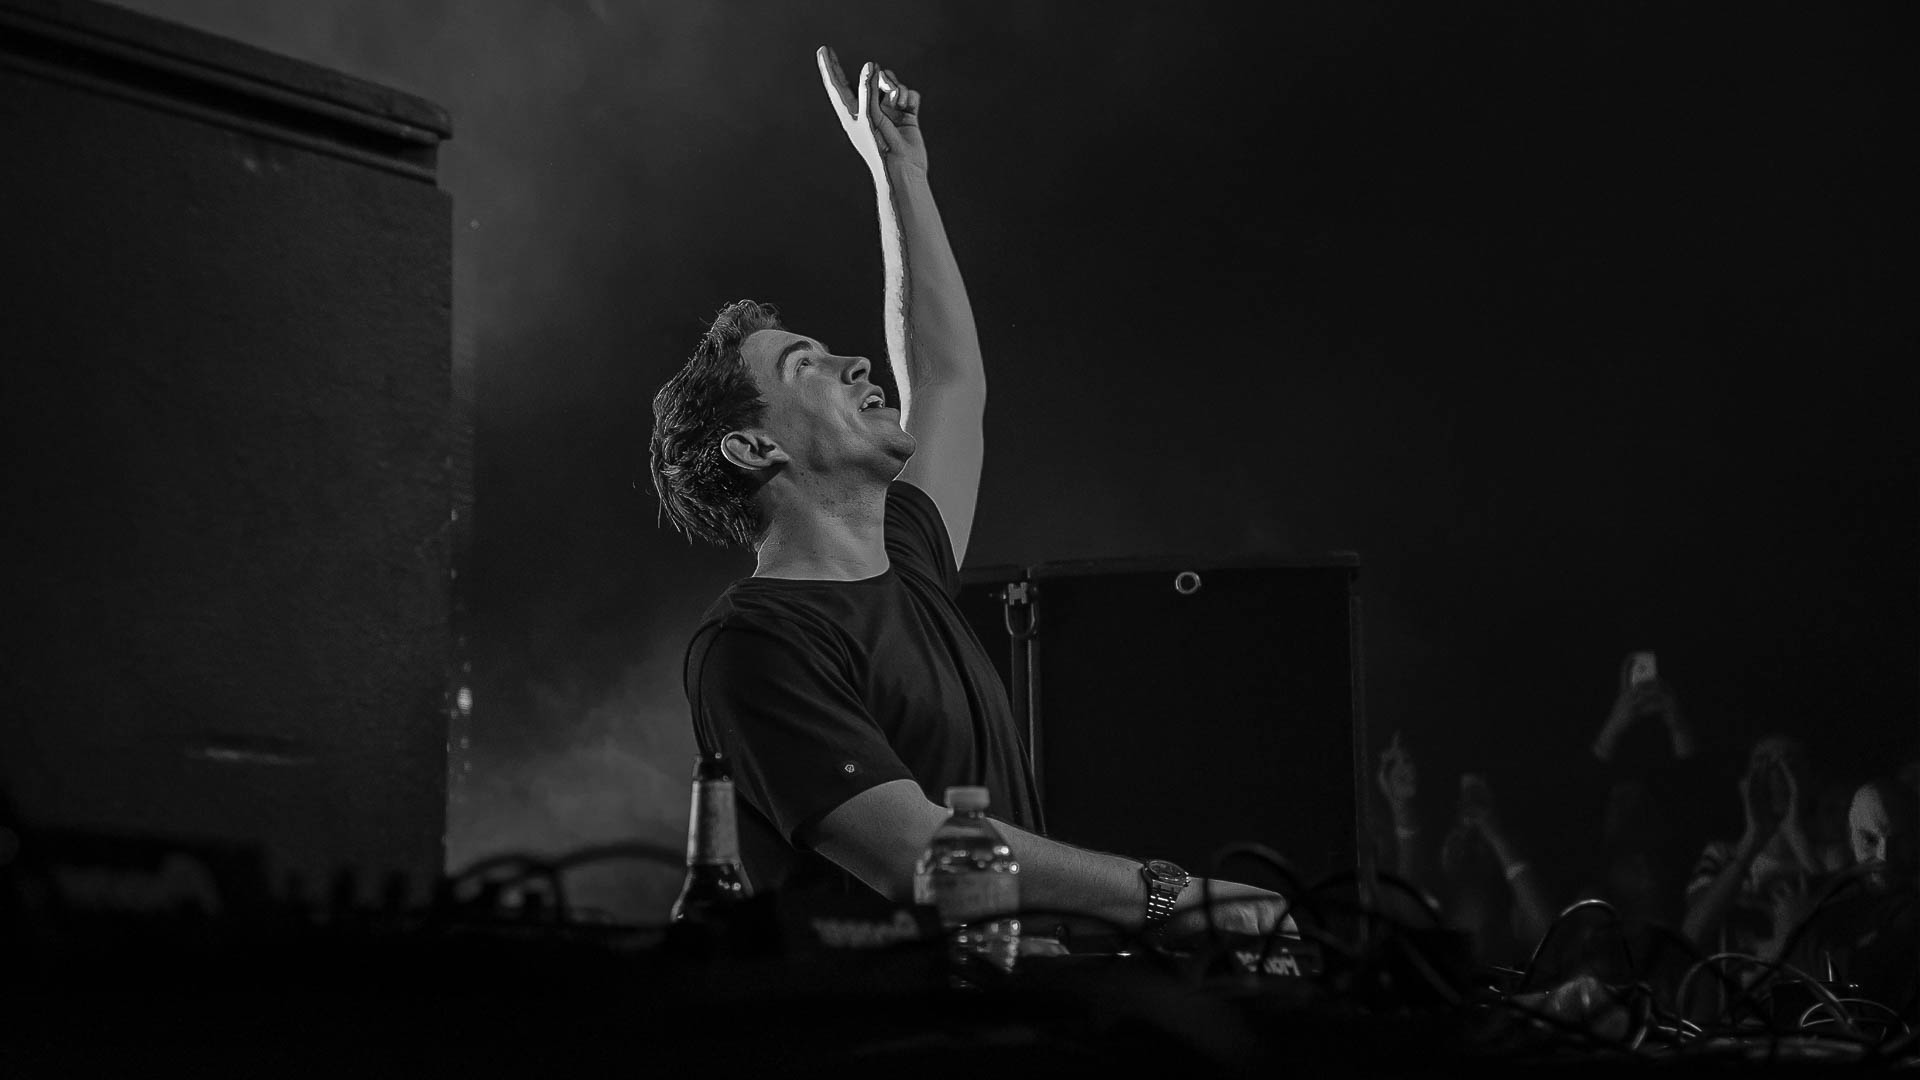 Hardwell Best Selected HD Wallpaper Background In High